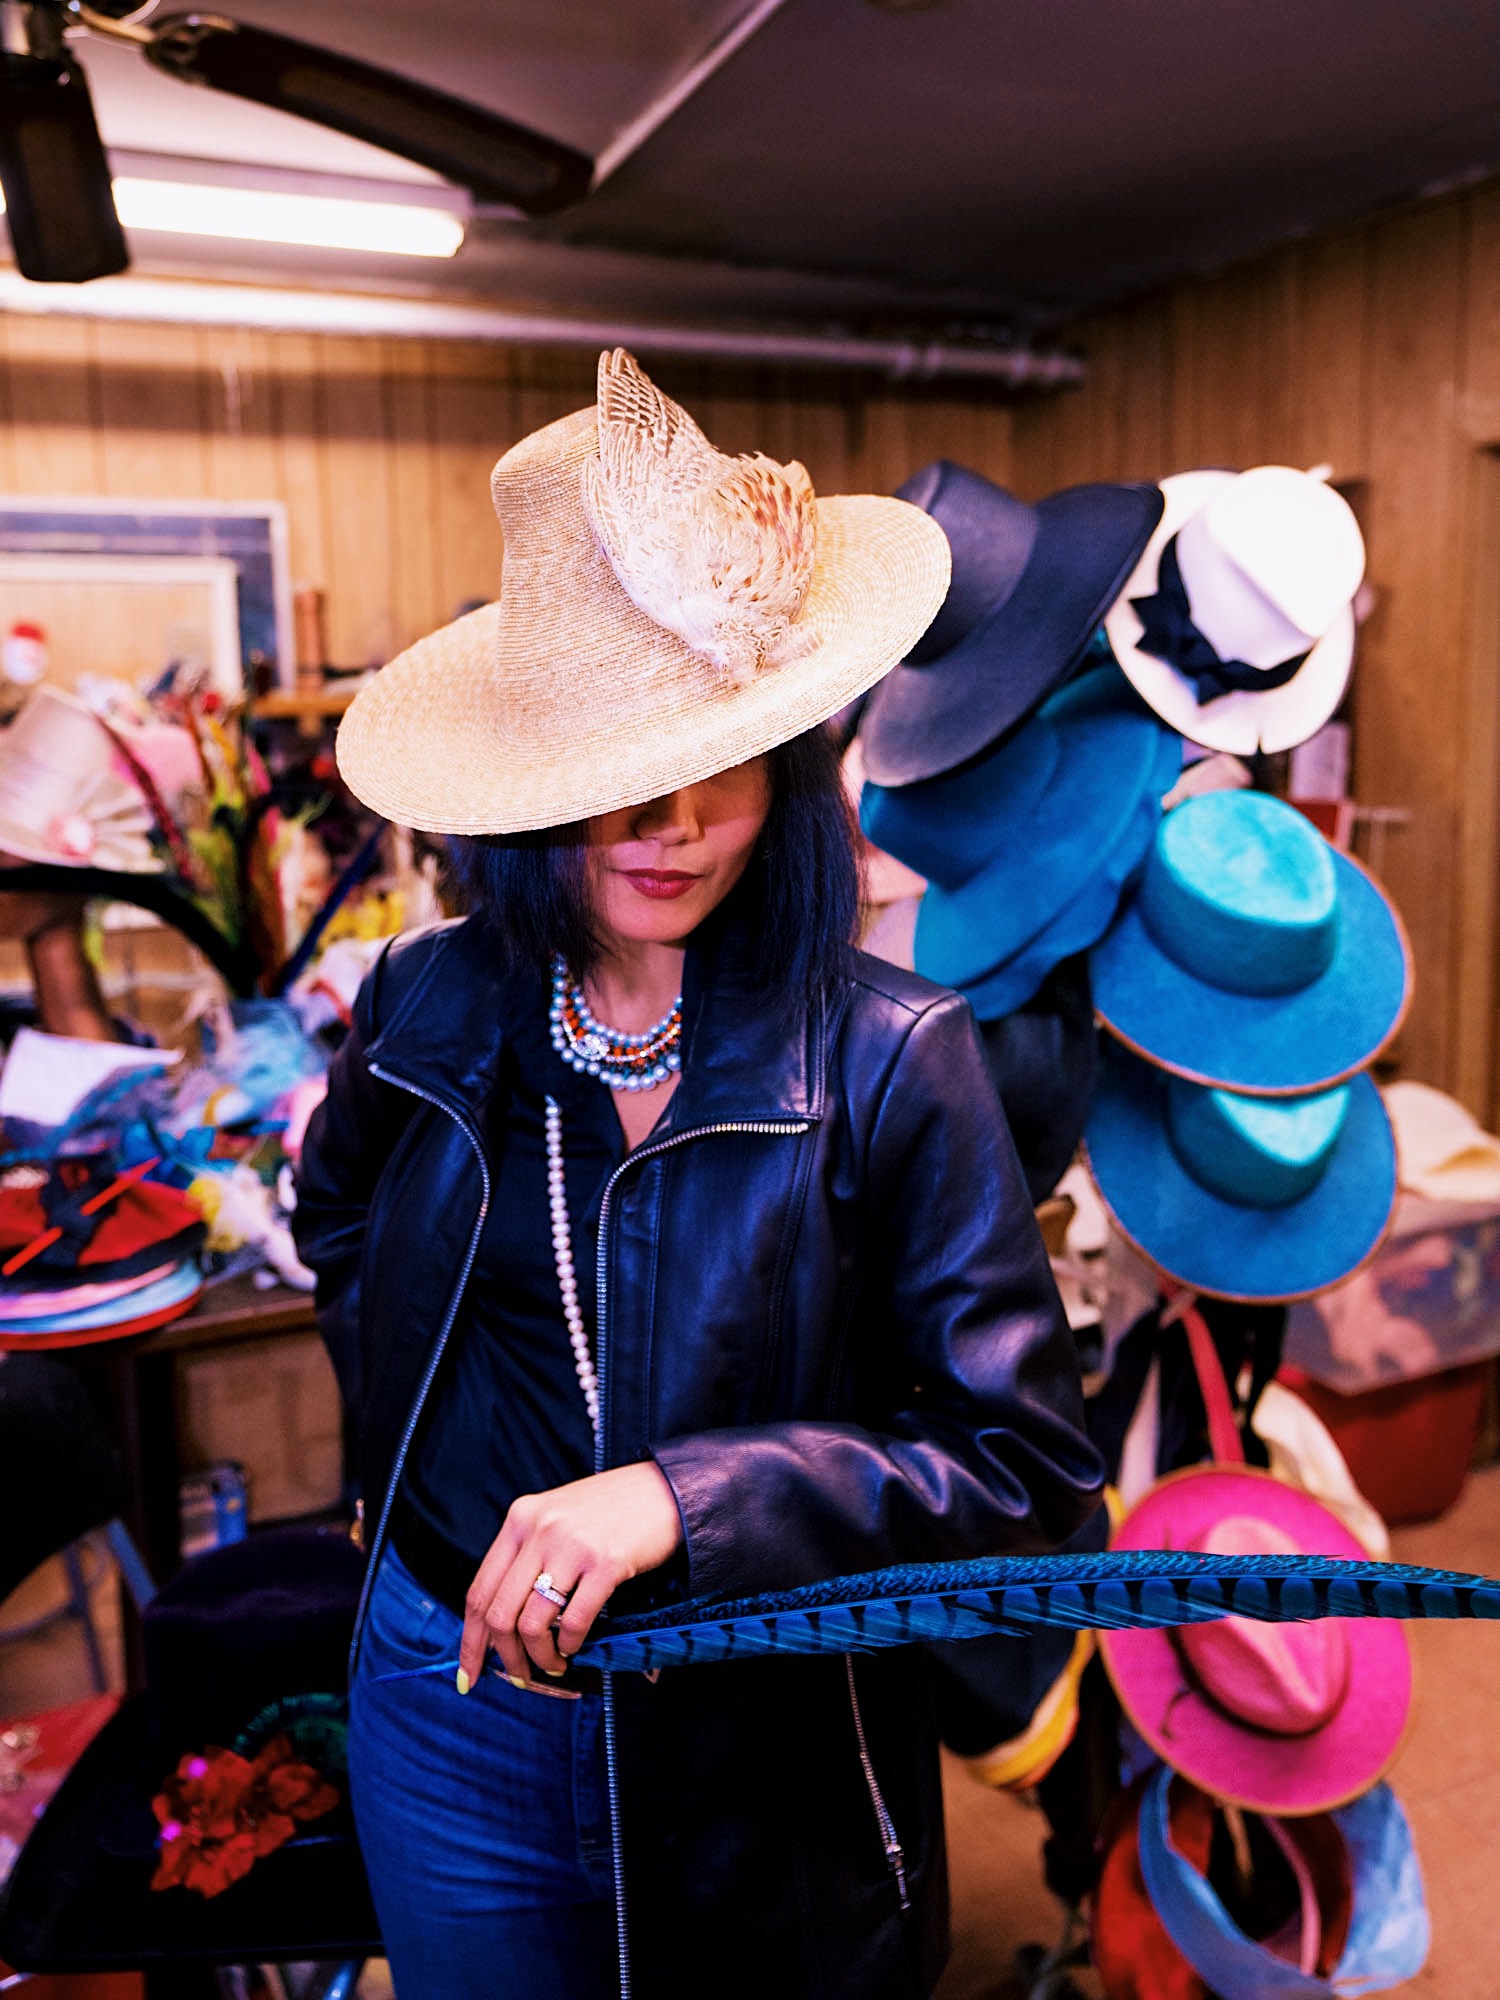 nanphanita is wear a one of a kind summer straw hat made by cha cha